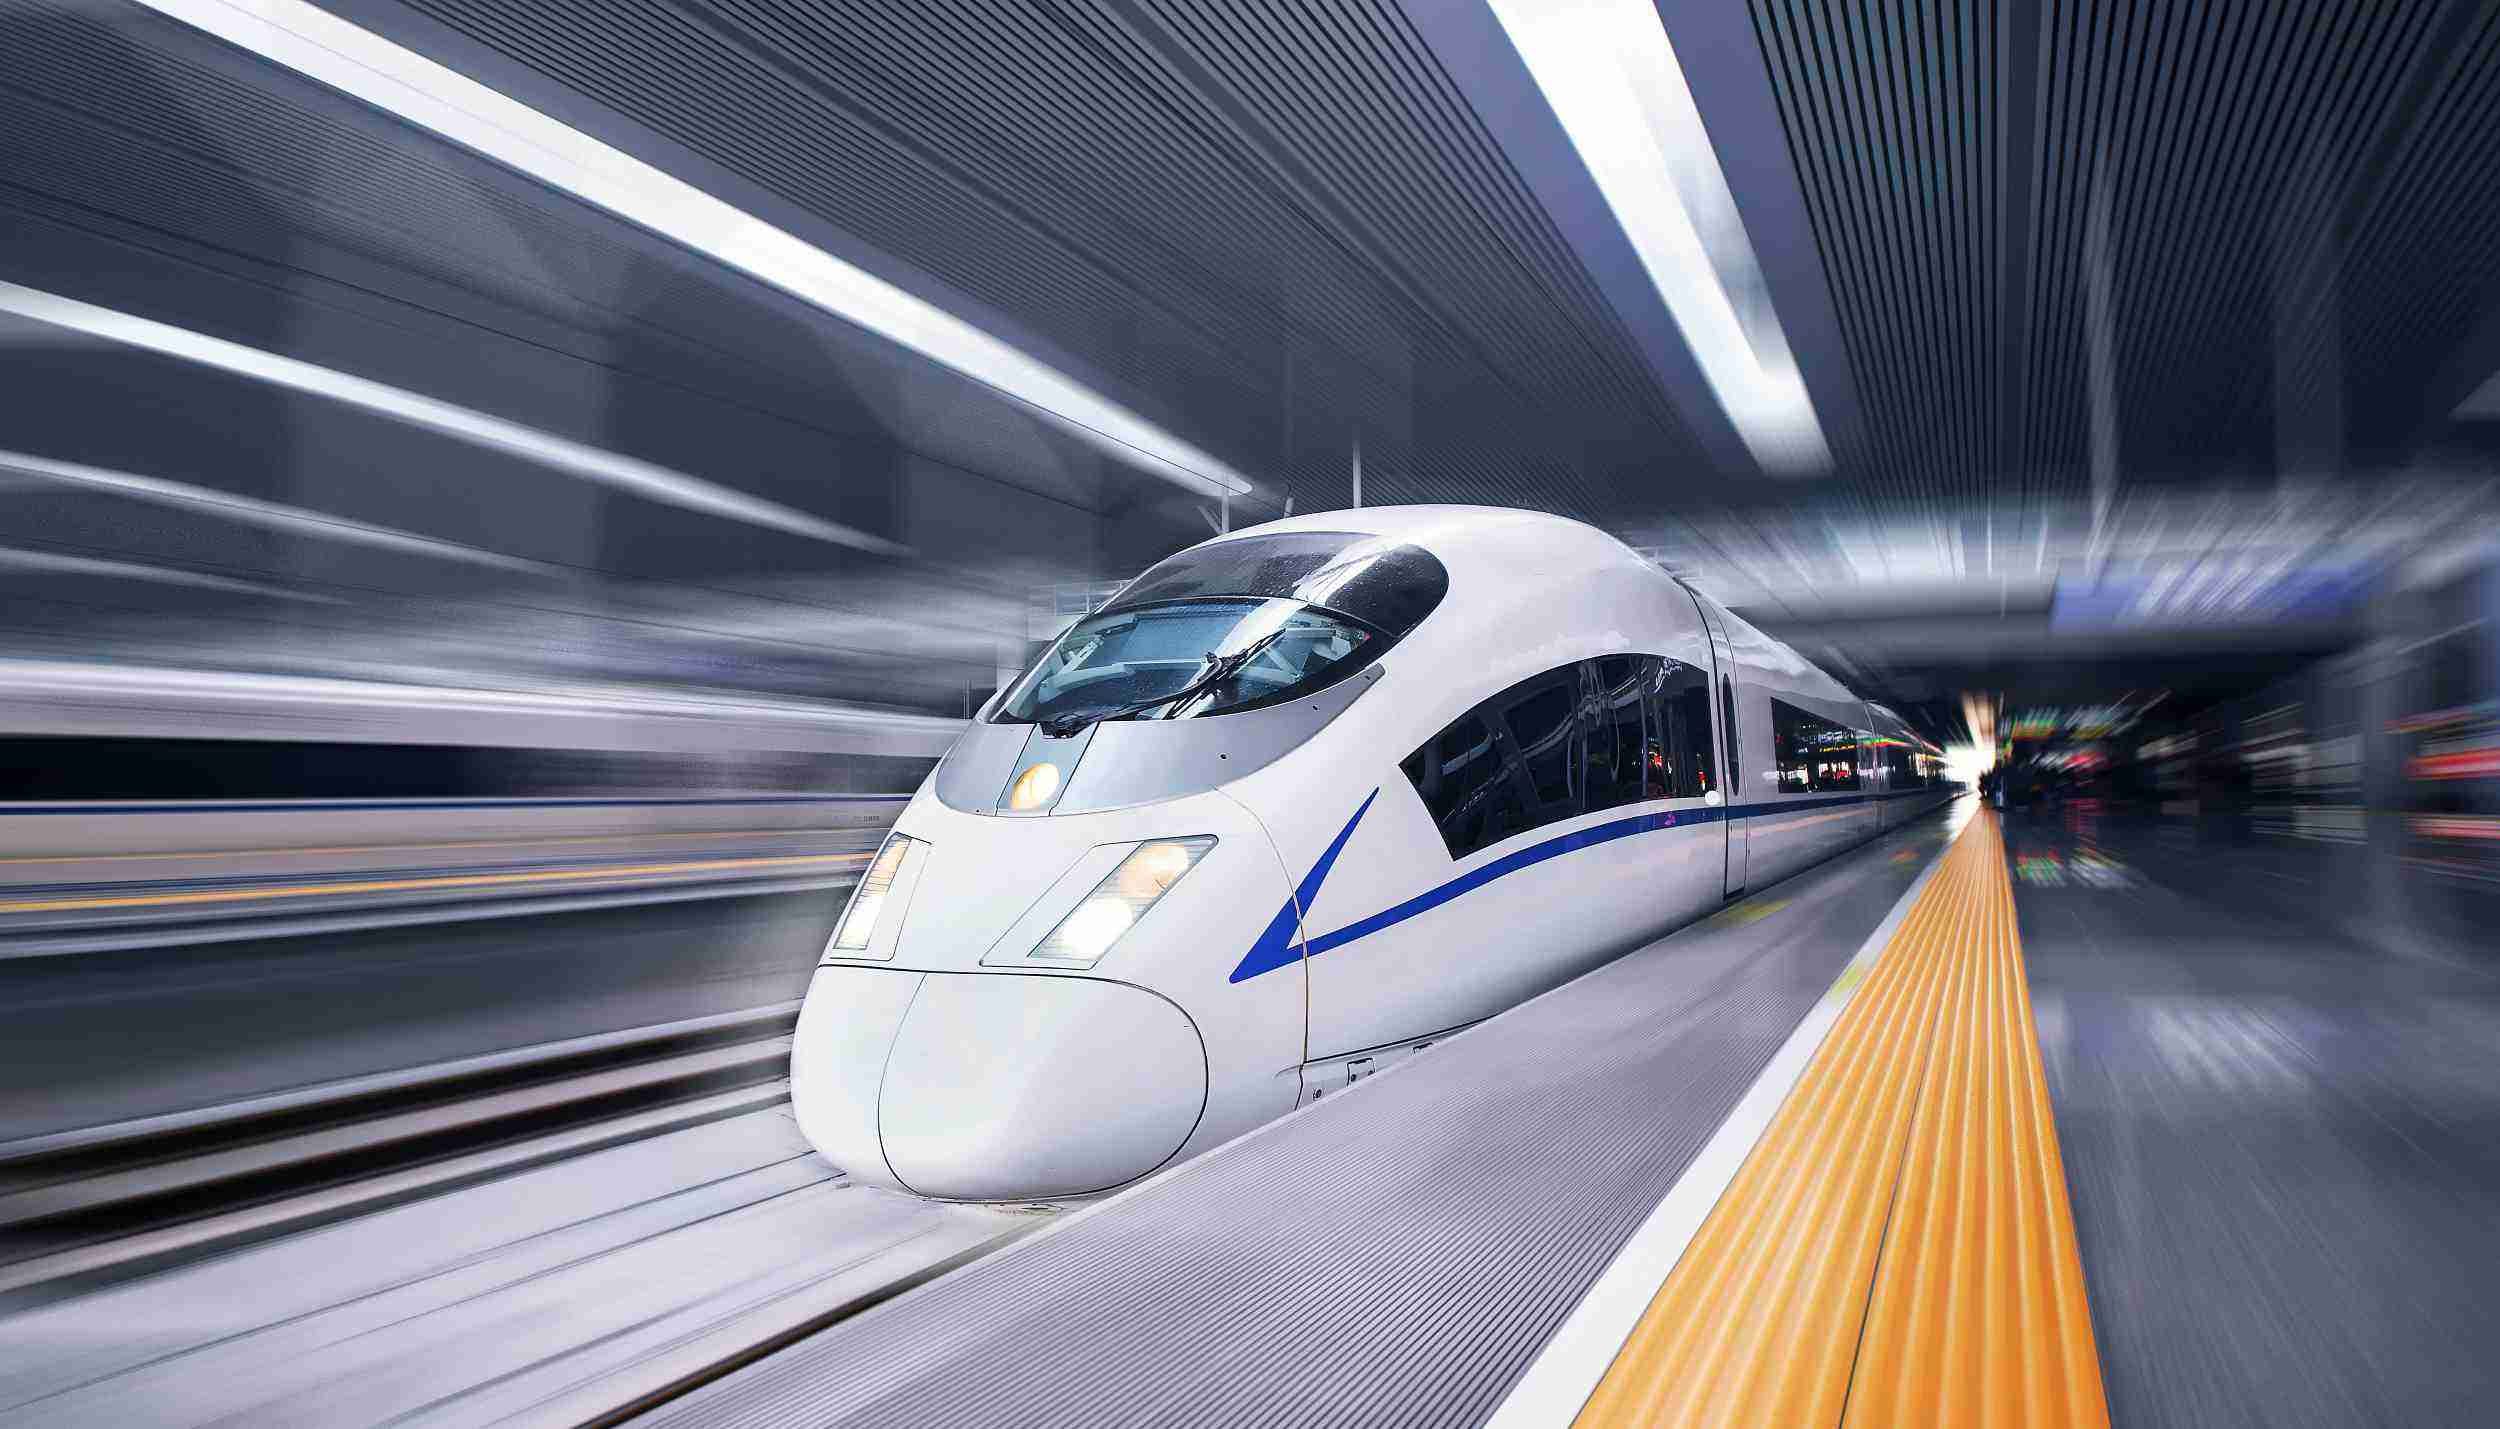 CMSC-backed railroad equipment developer Victall eyes $172m in Shanghai IPO